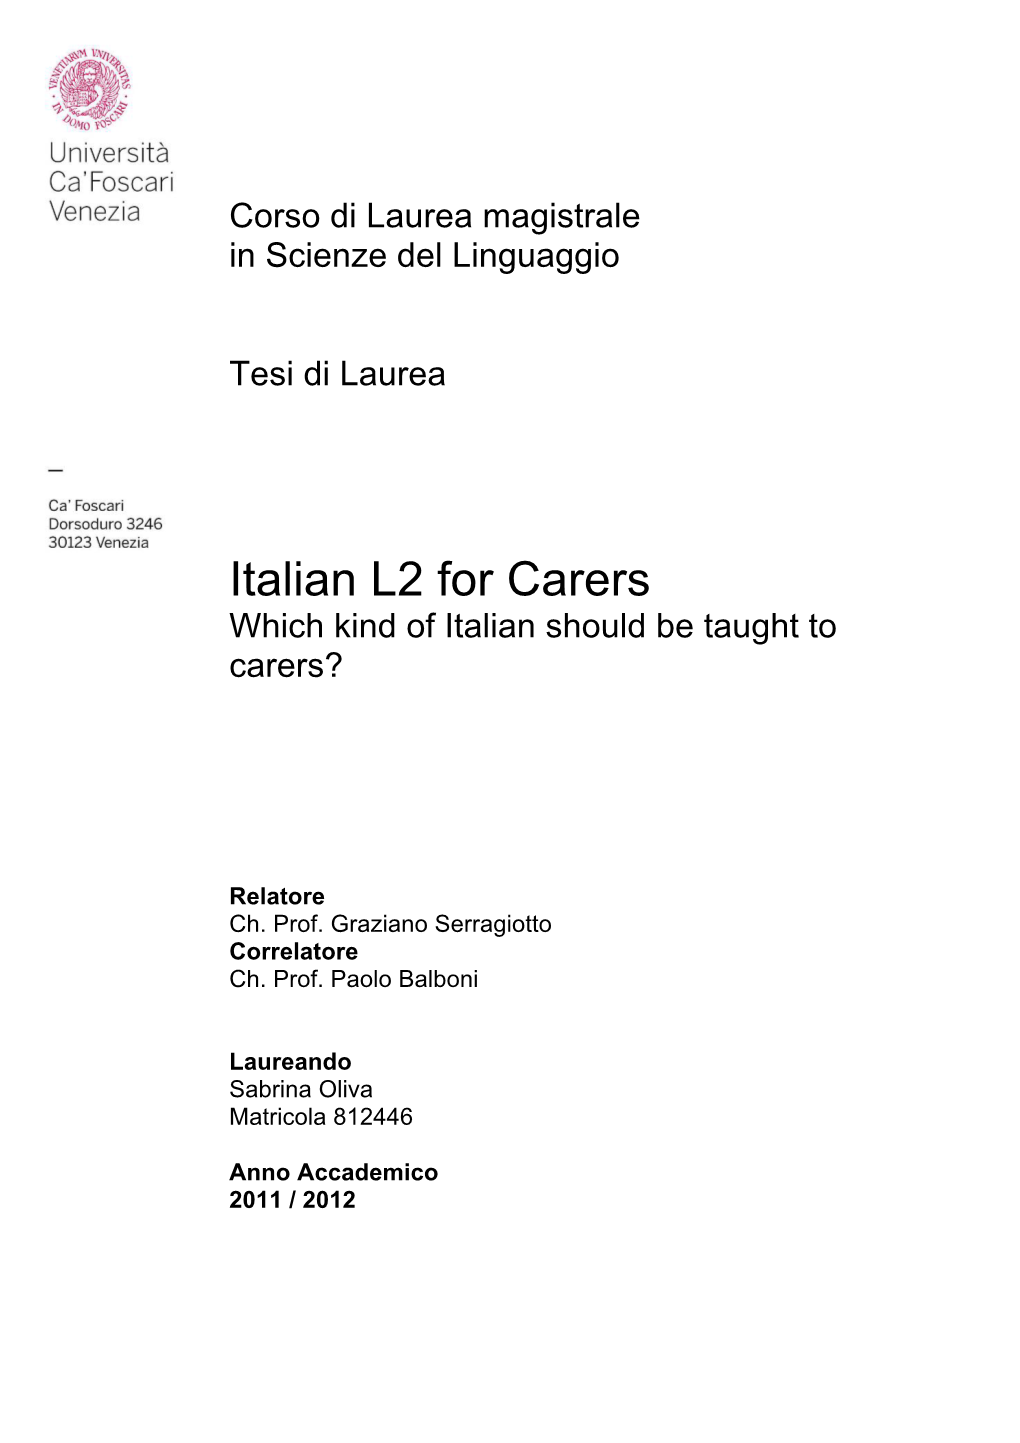 Italian L2 for Carers Which Kind of Italian Should Be Taught to Carers?